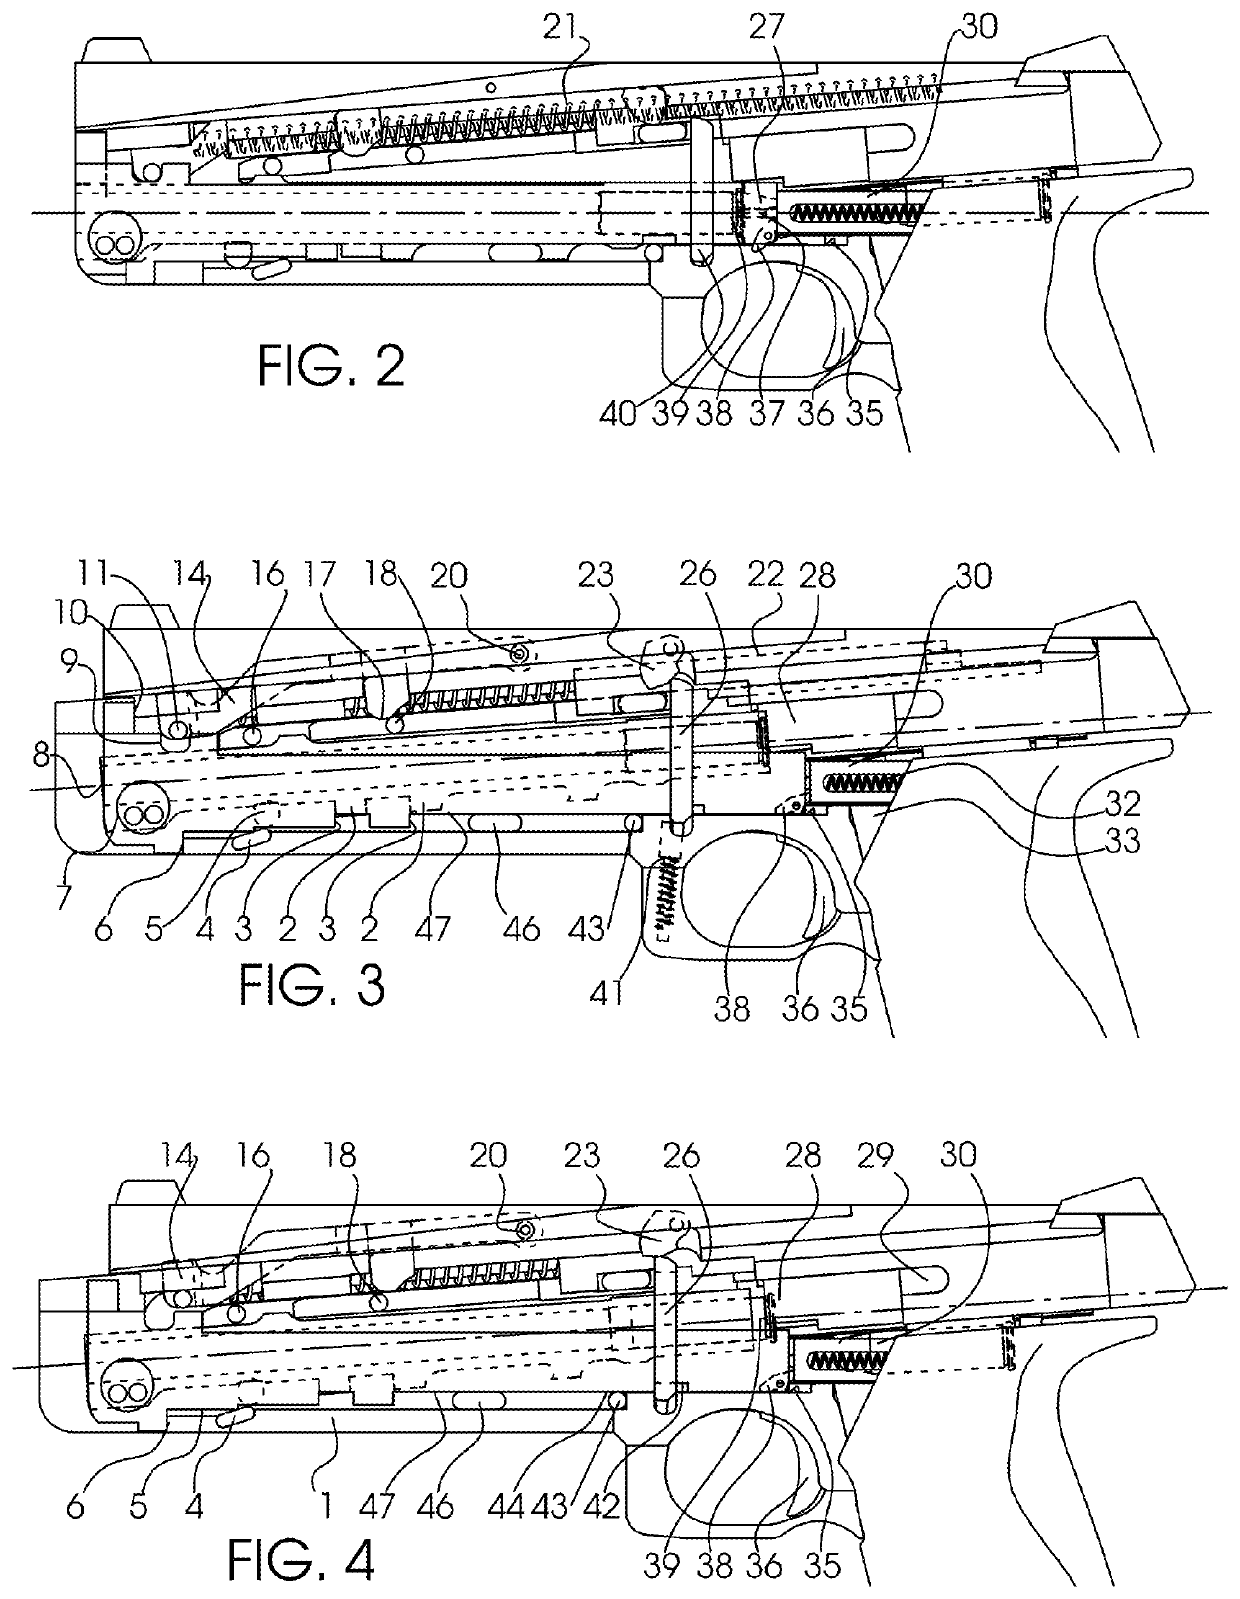 Recoil-operated pistol